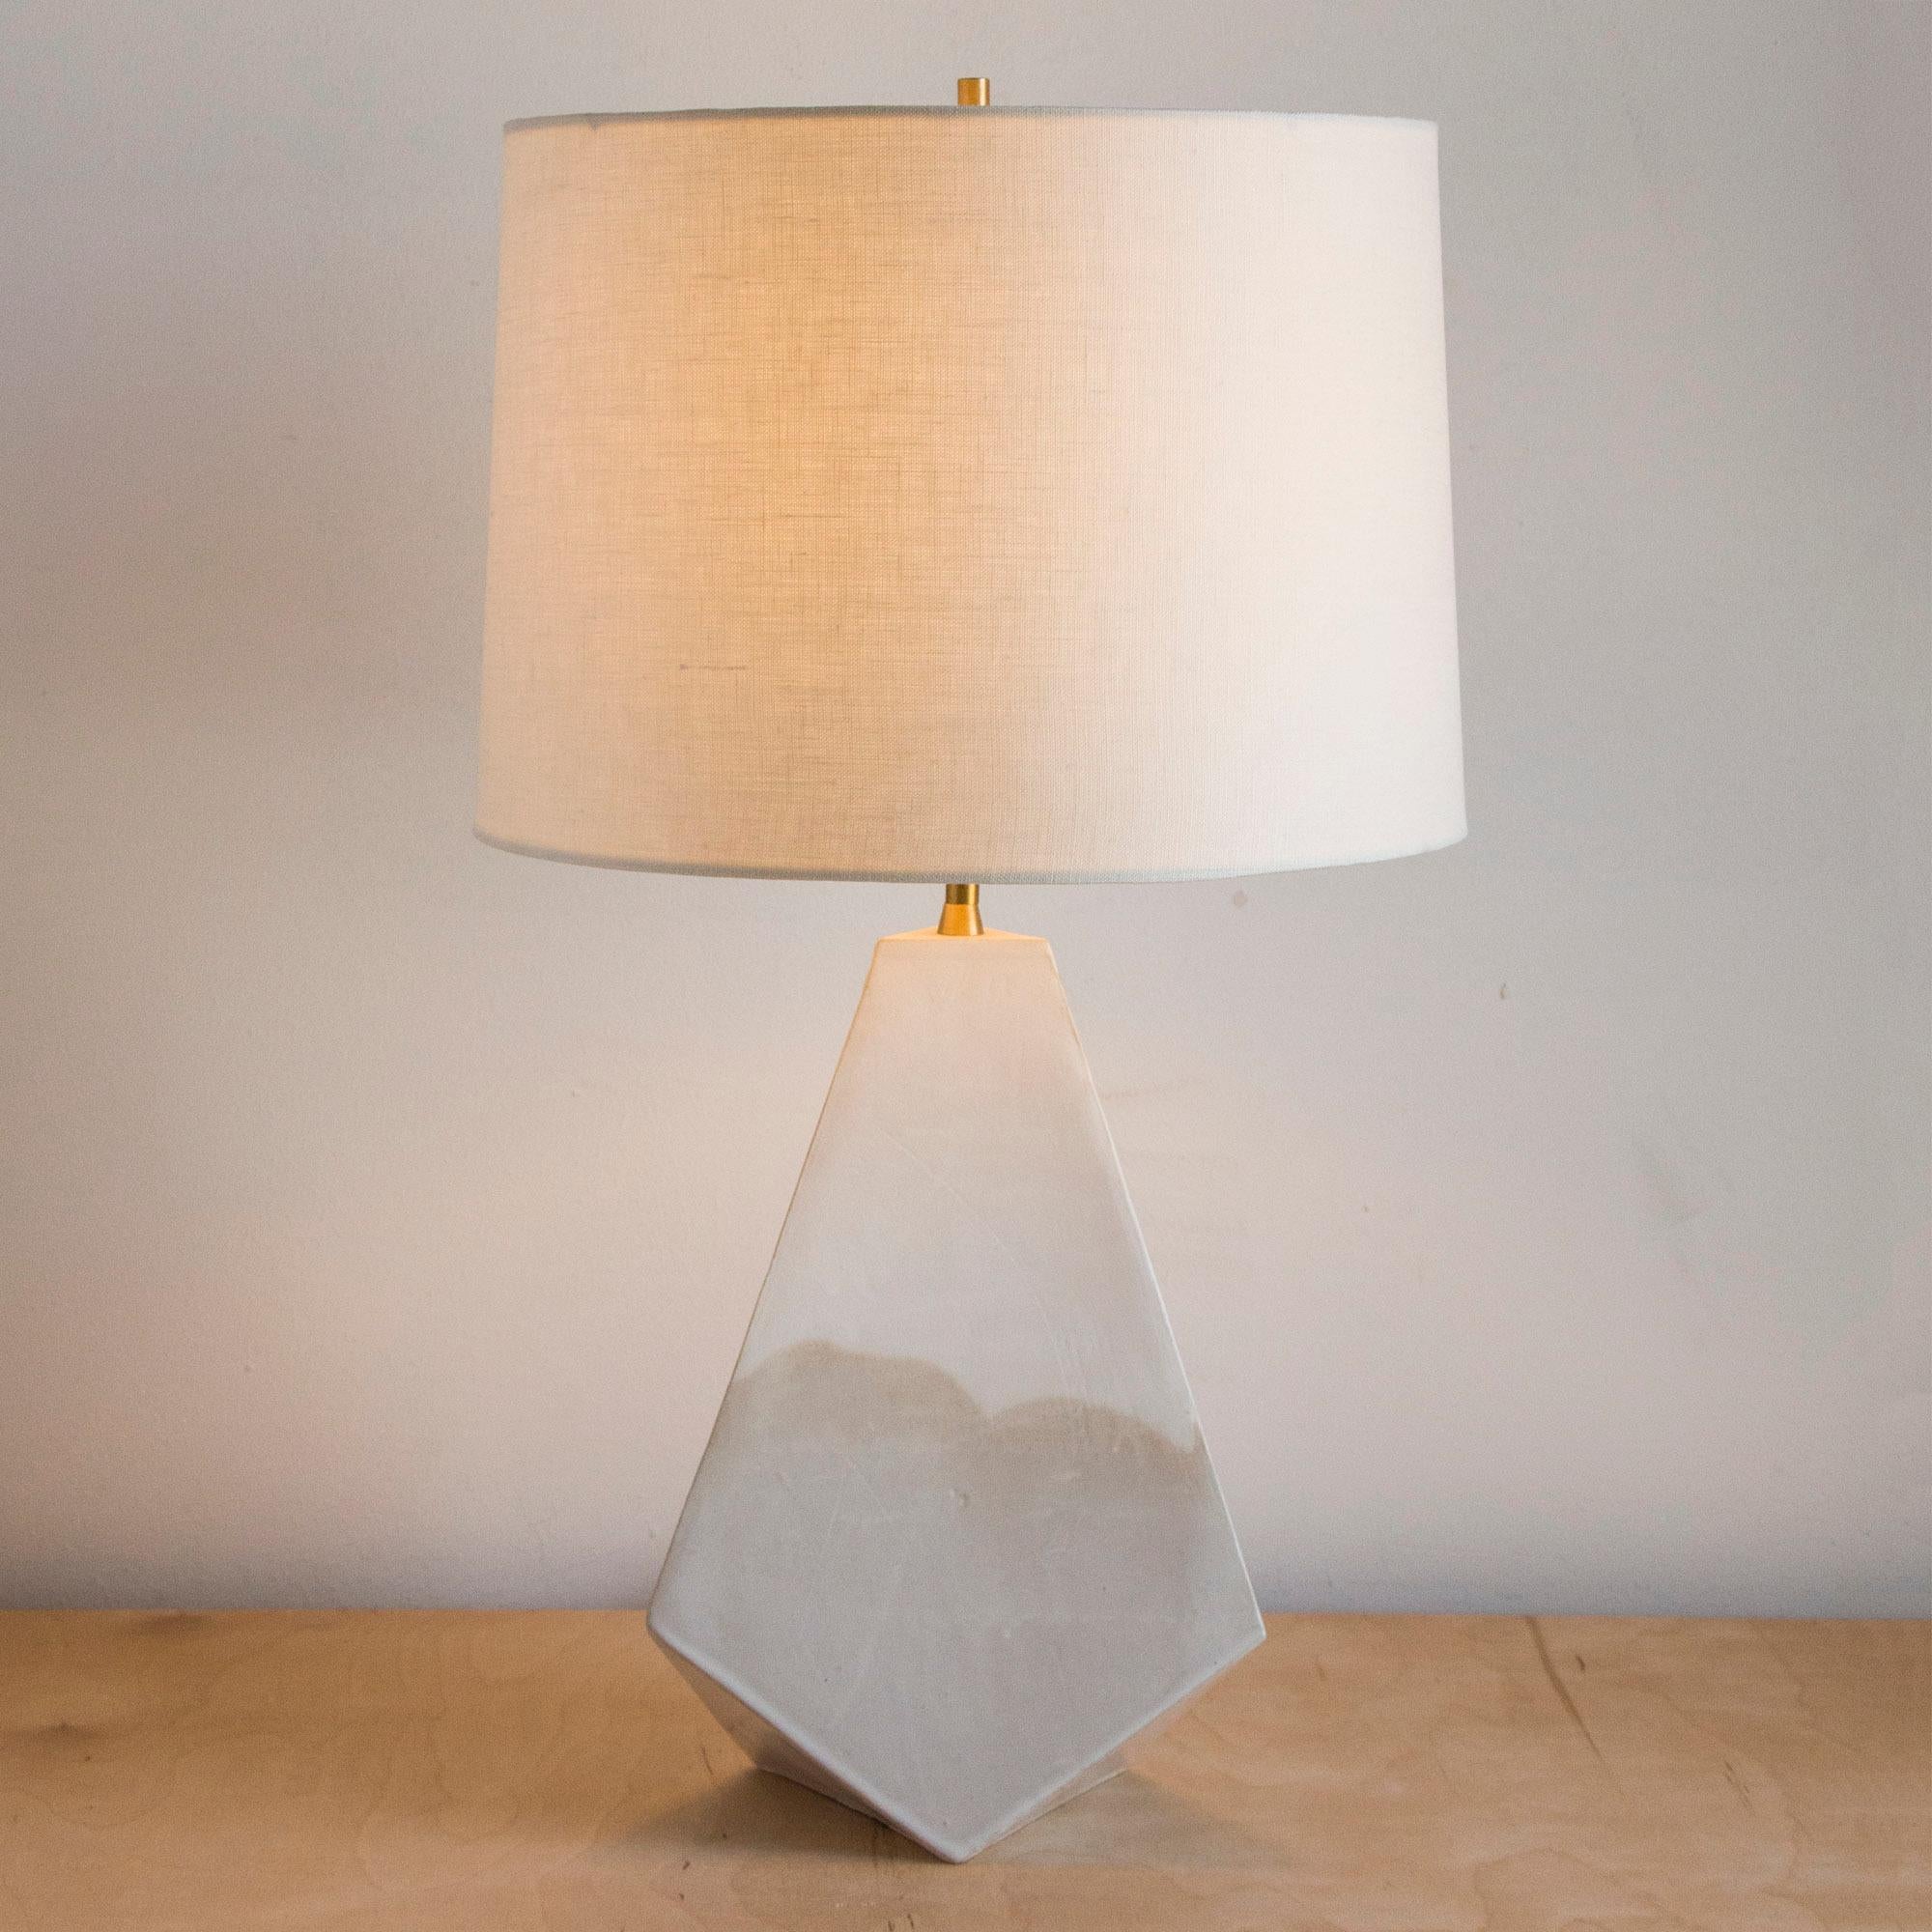 This geometric ceramic 'Mountain' table lamp is made from a sandy beige clay, formed into a dramatic pyramid shape, and featuring an organic matte finish accented by hand-poured glossy white glaze. Each piece is individually handmade and entirely